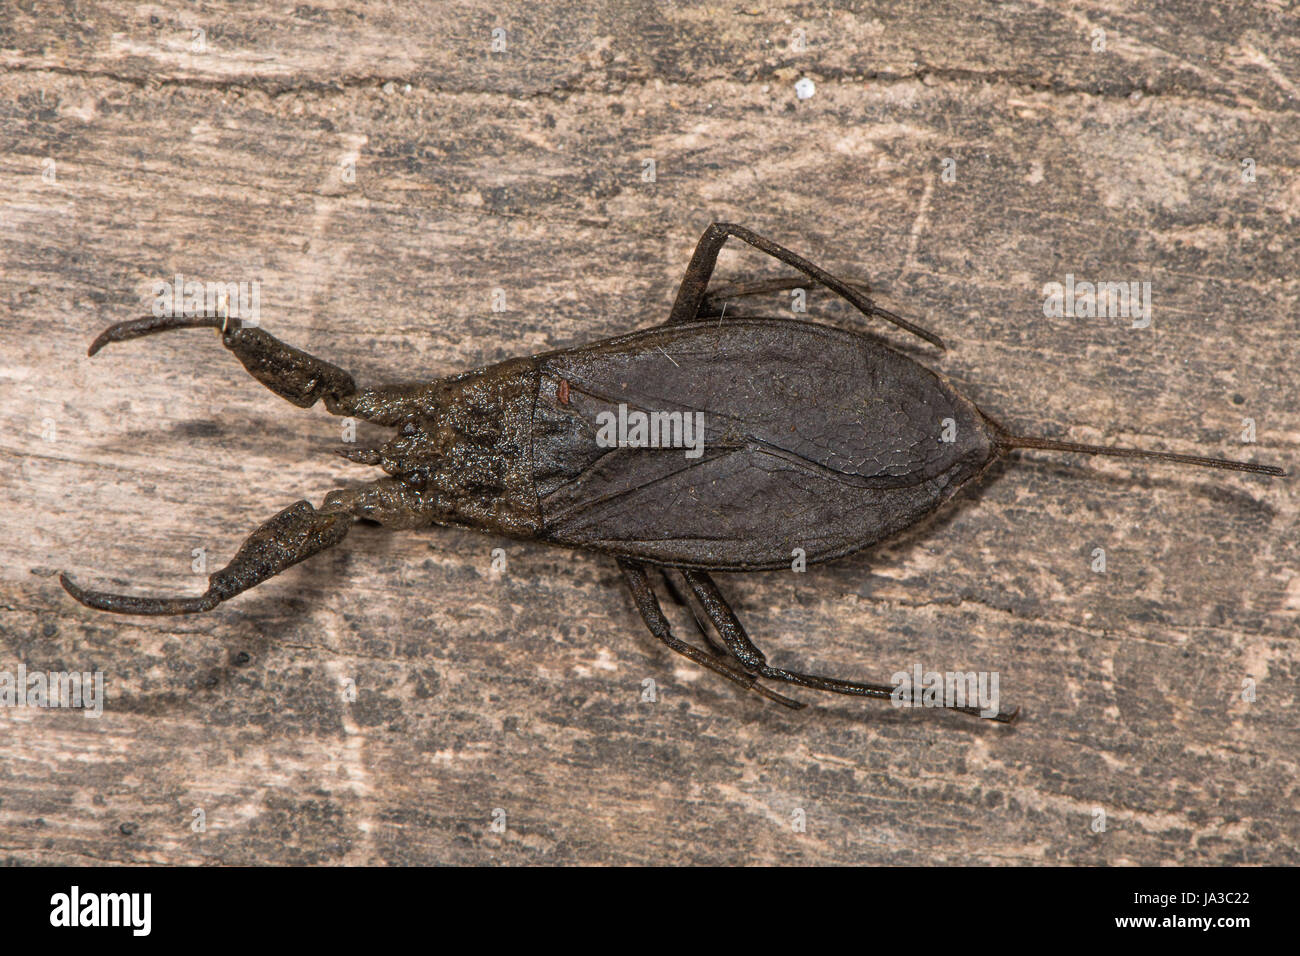 Water scorpion (Nepa cinerea). Predatory aquatic bug in the family Nepidae, with caudal process that acts as breathing tube Stock Photo